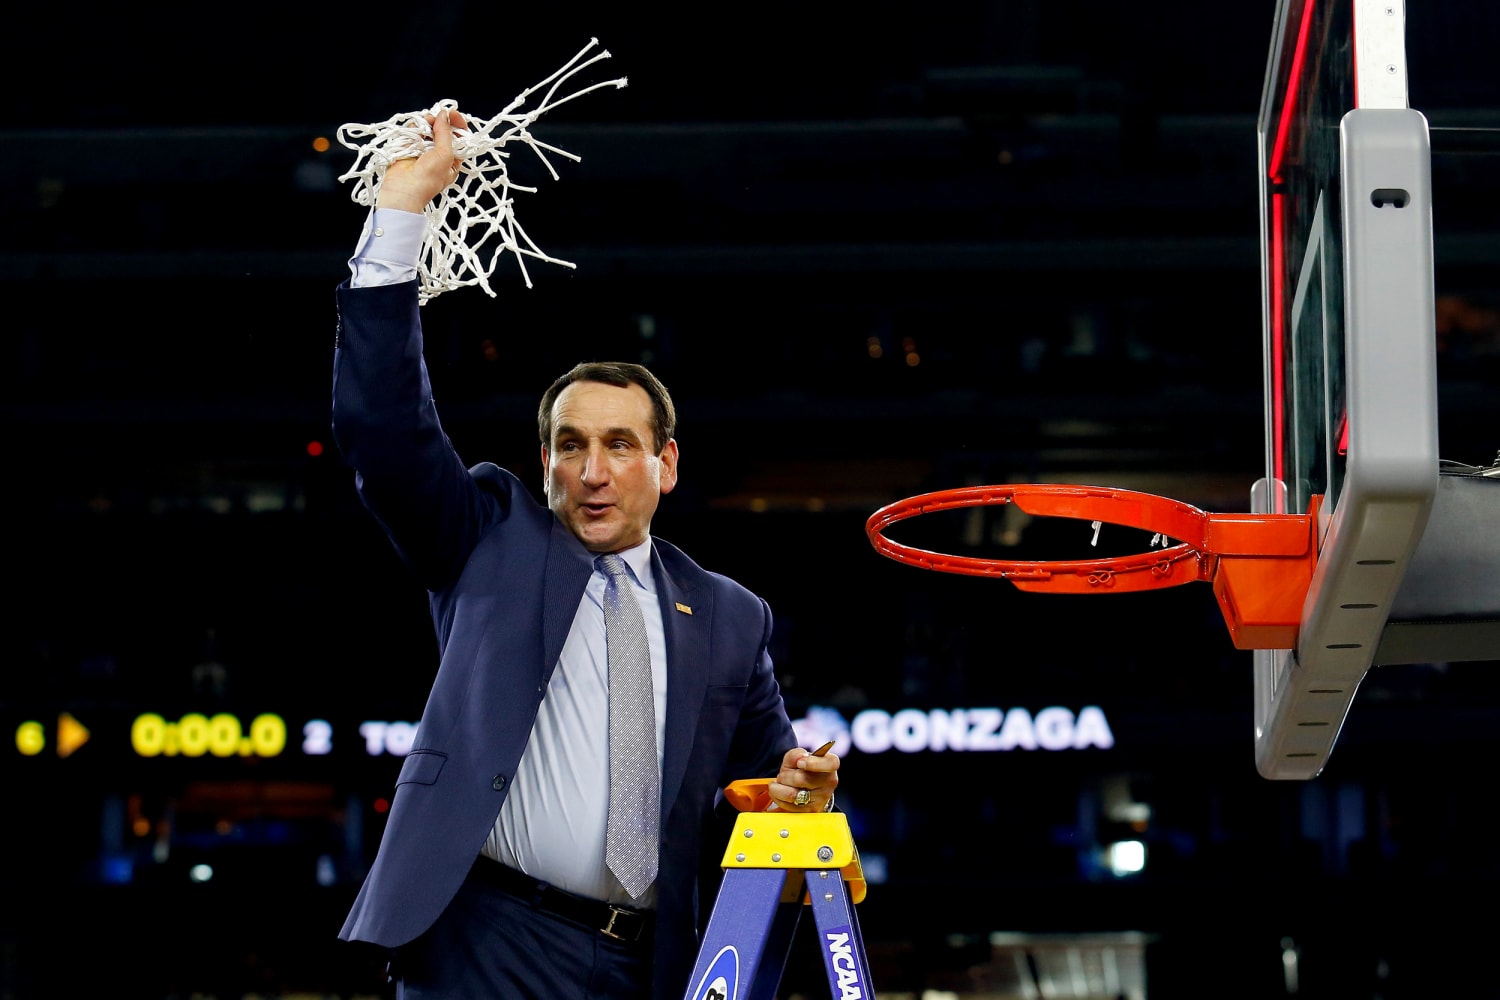 Duke basketball coach Mike Krzyzewski is looking forward to more time with  family after retirement